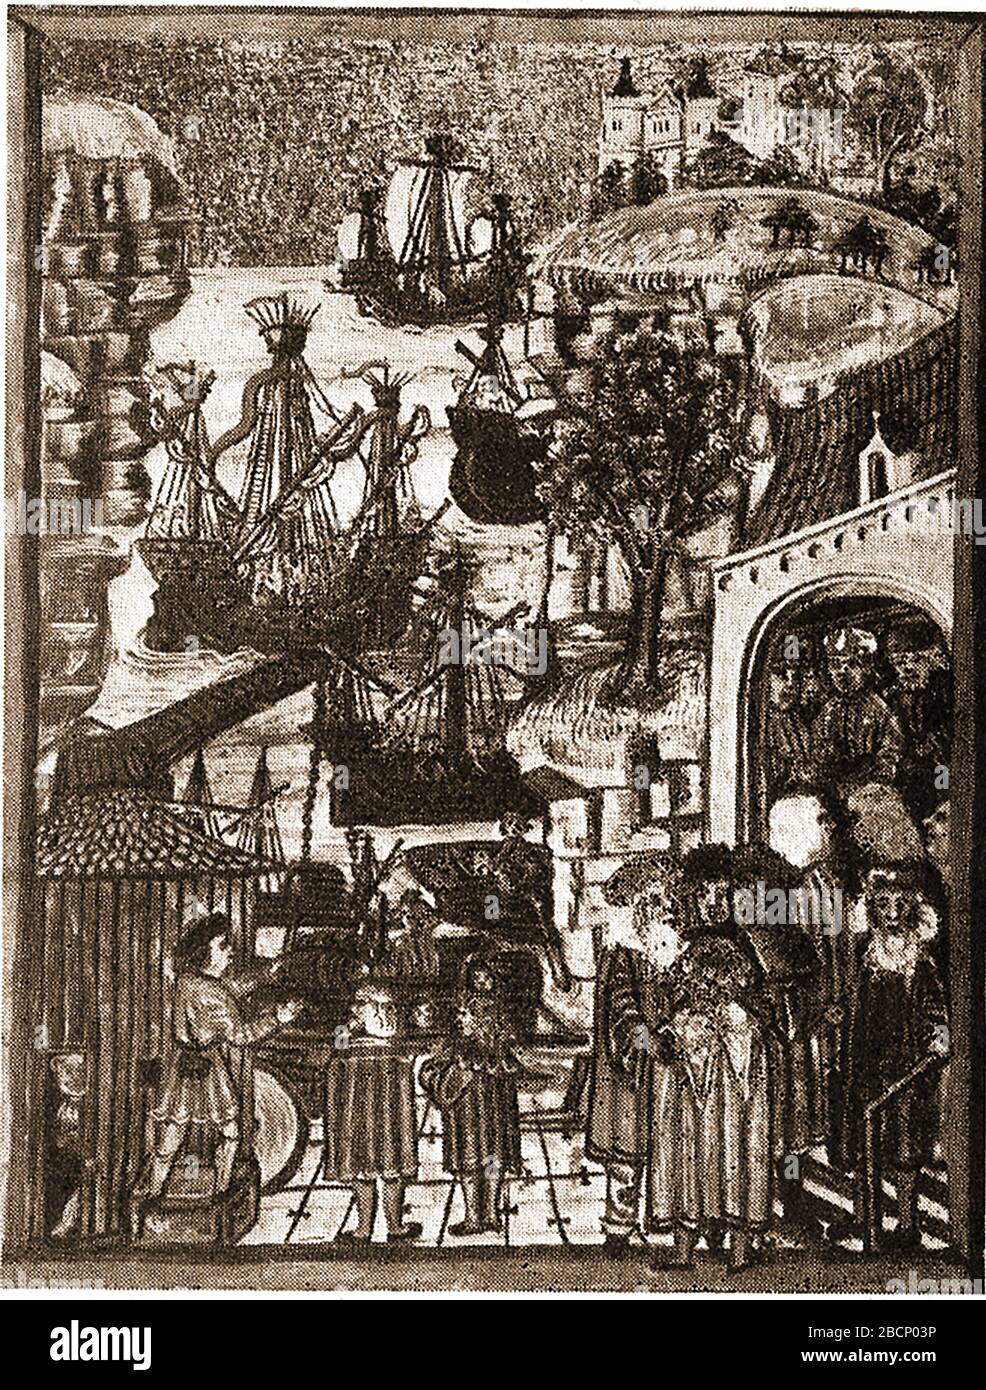 15th century illustration - HANSA PORTS Merchantmen of the Hanseatic league at HAMBURG. Hanse later spelled as Hansa,[3] was the Old High German word for a convoy of merchants by land or sea. Stock Photo